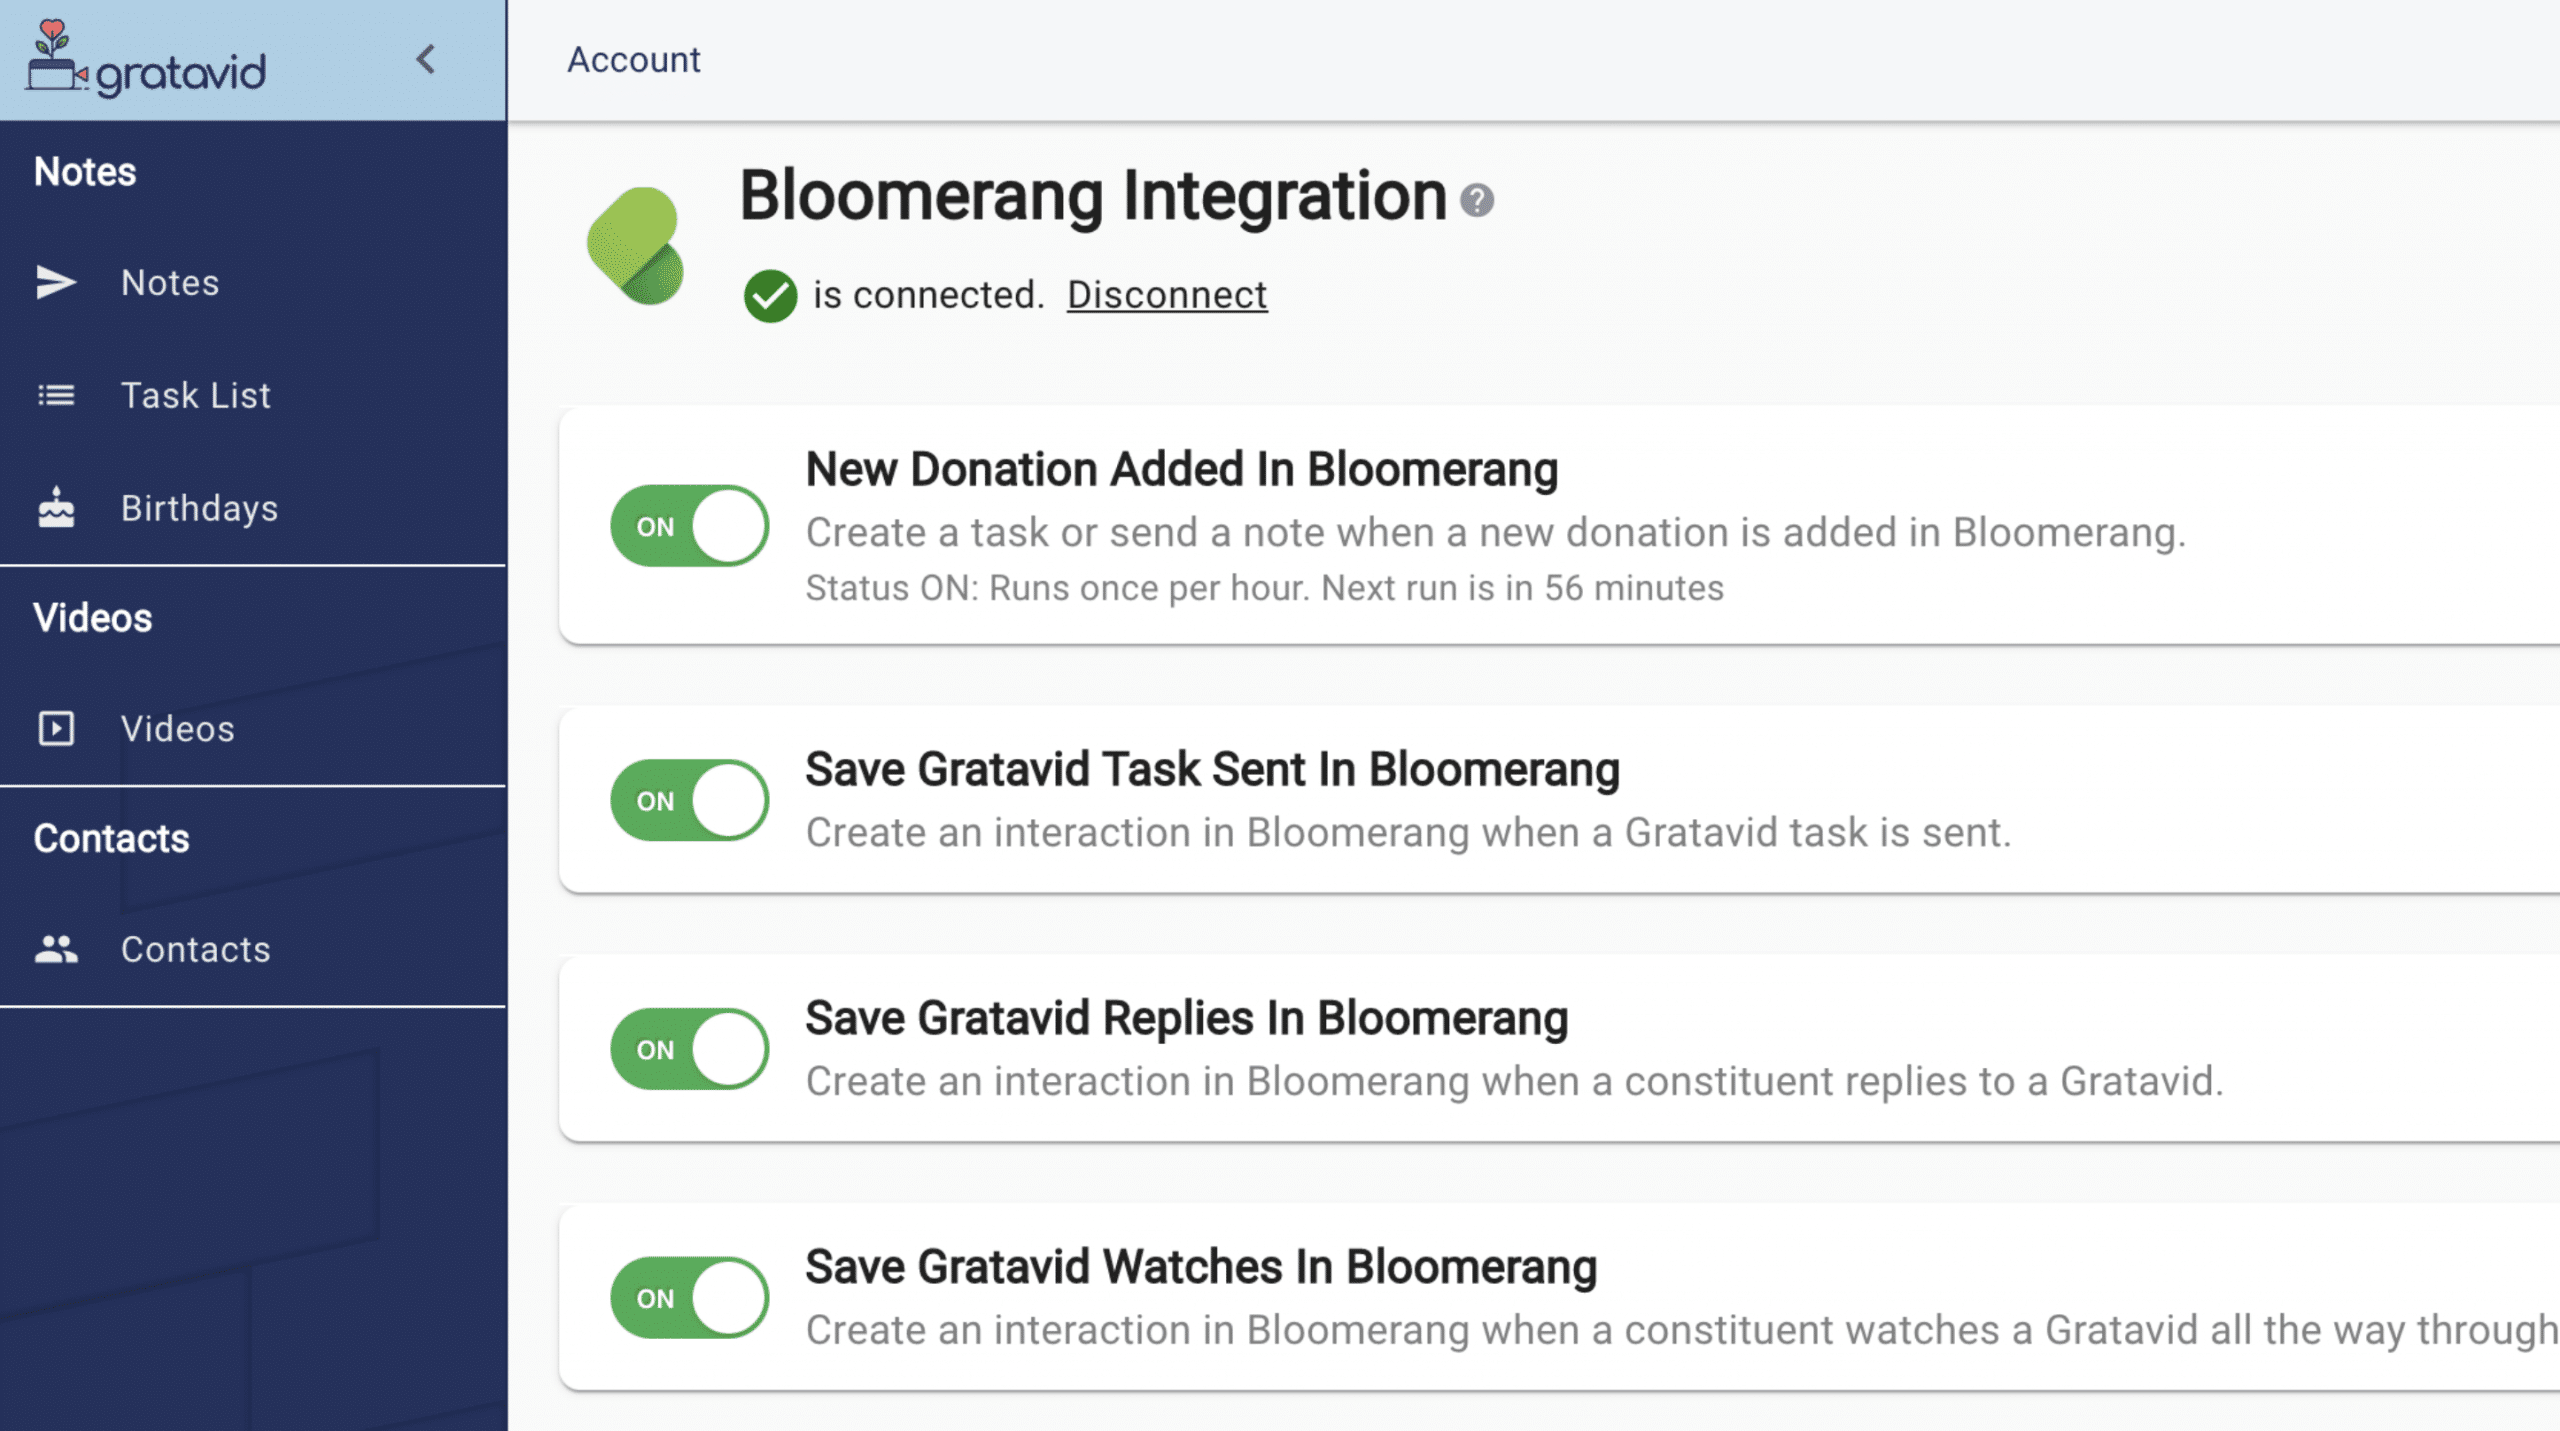 Add tasks for first donors and other workflows directly from Bloomerang to Gratavid